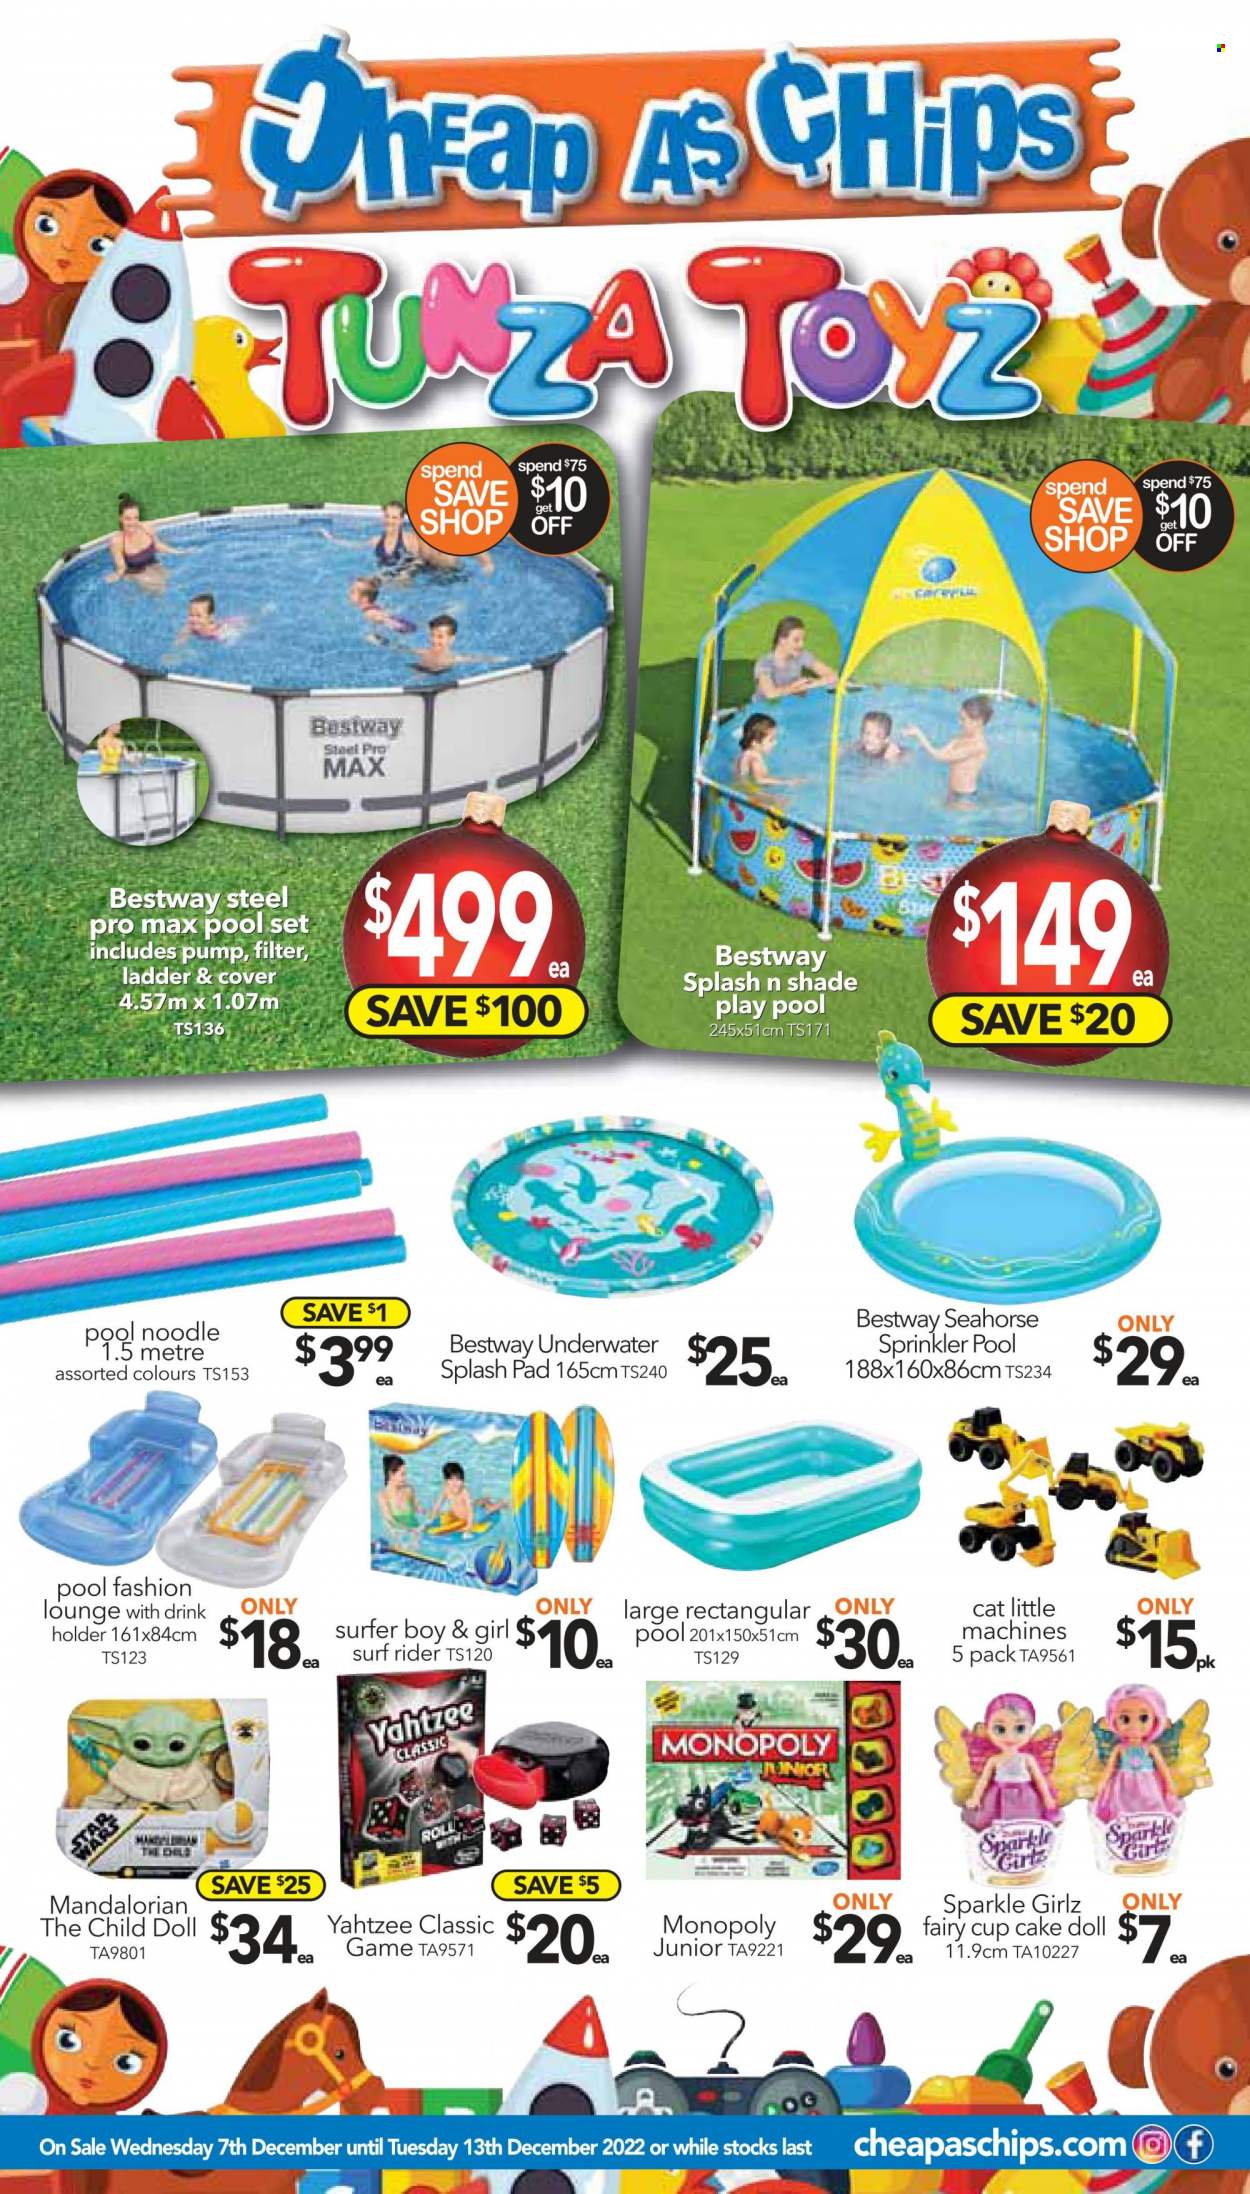 thumbnail - Cheap as Chips Catalogue - 7 Dec 2022 - 13 Dec 2022 - Sales products - lounge, chips, Fairy, Surf, holder, cup, doll, Monopoly, pool noodle, ladder, cart, pump, drink holder. Page 24.